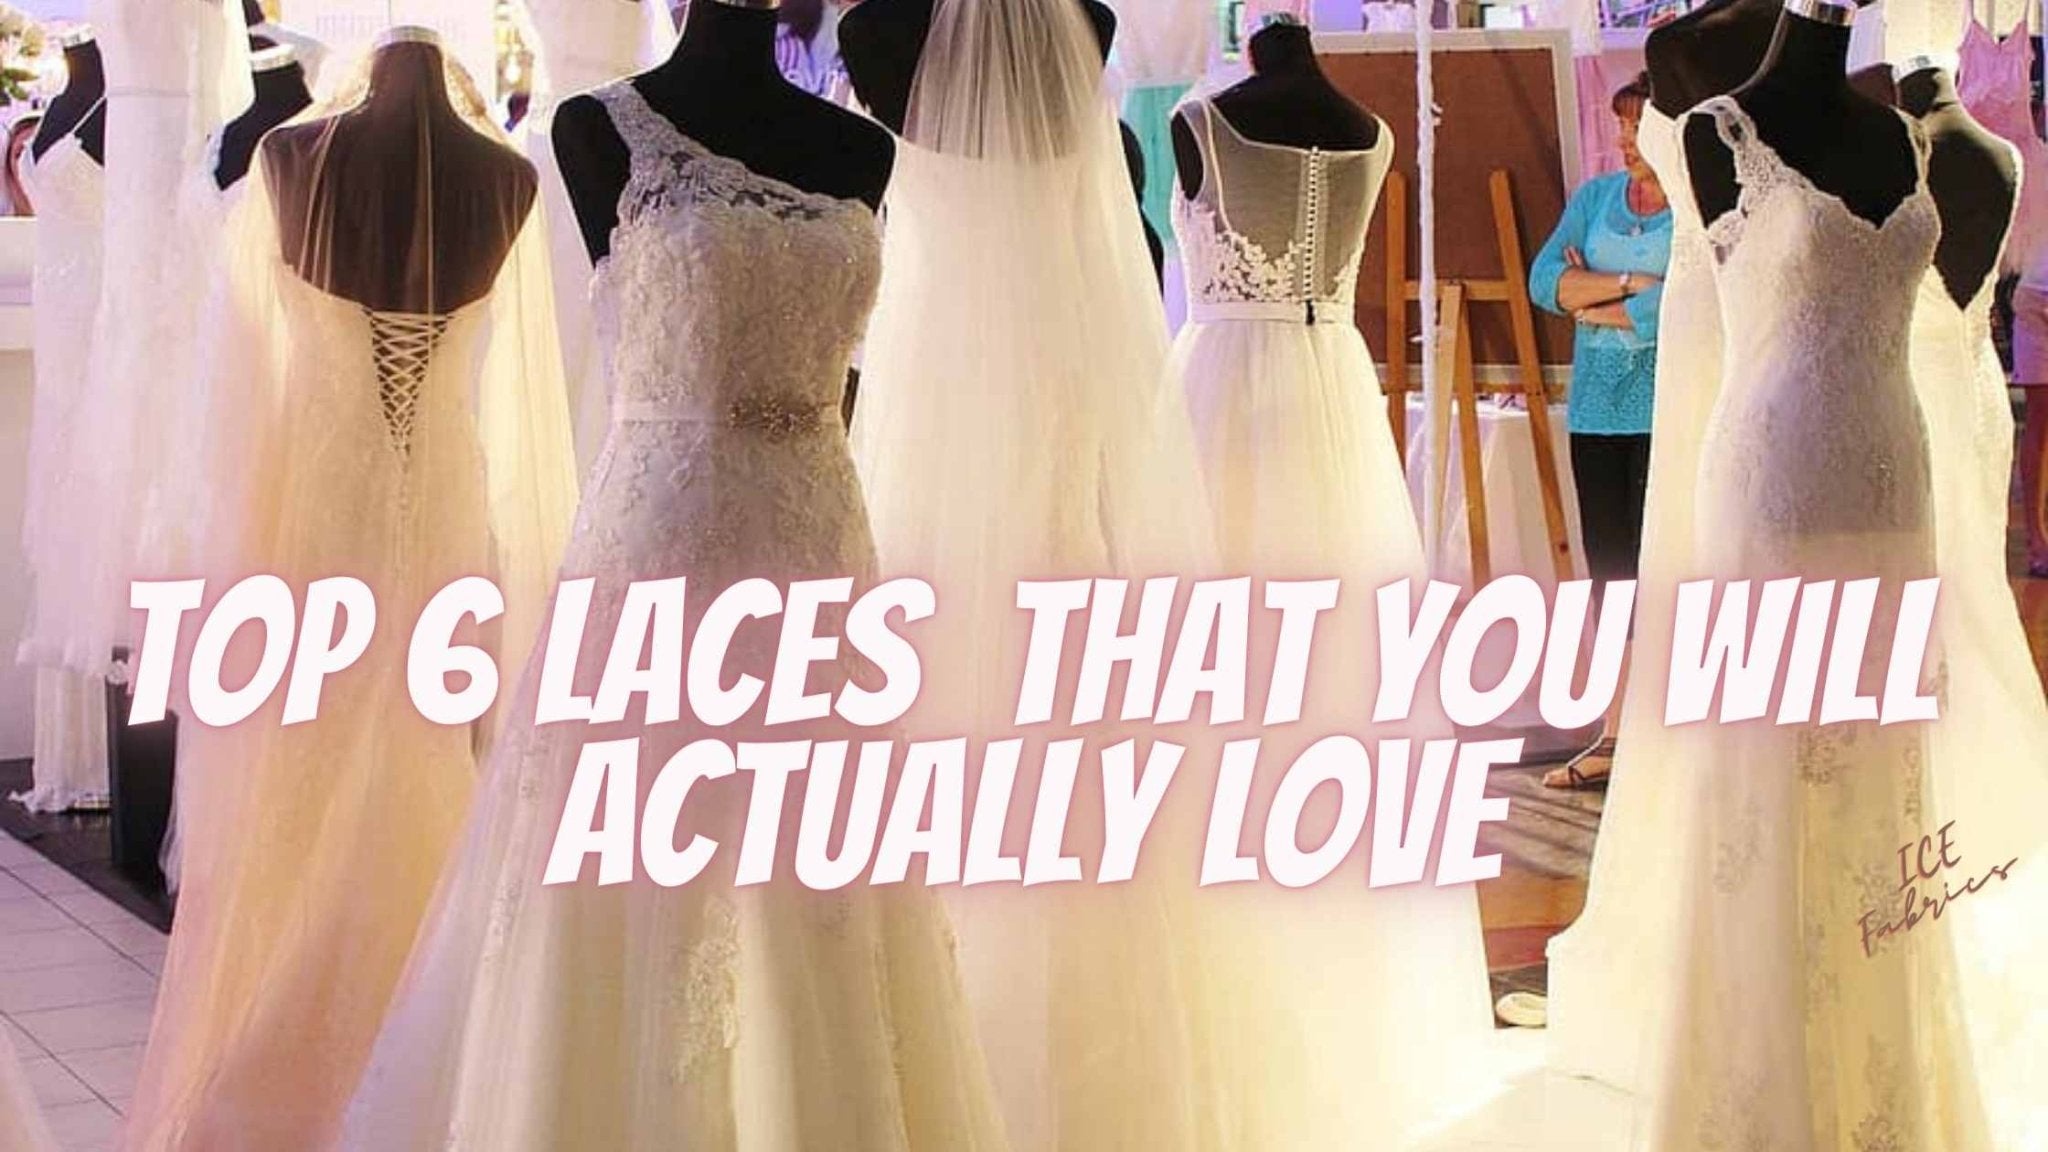 Top 6 Laces You Actually Will Love - ICE FABRICS